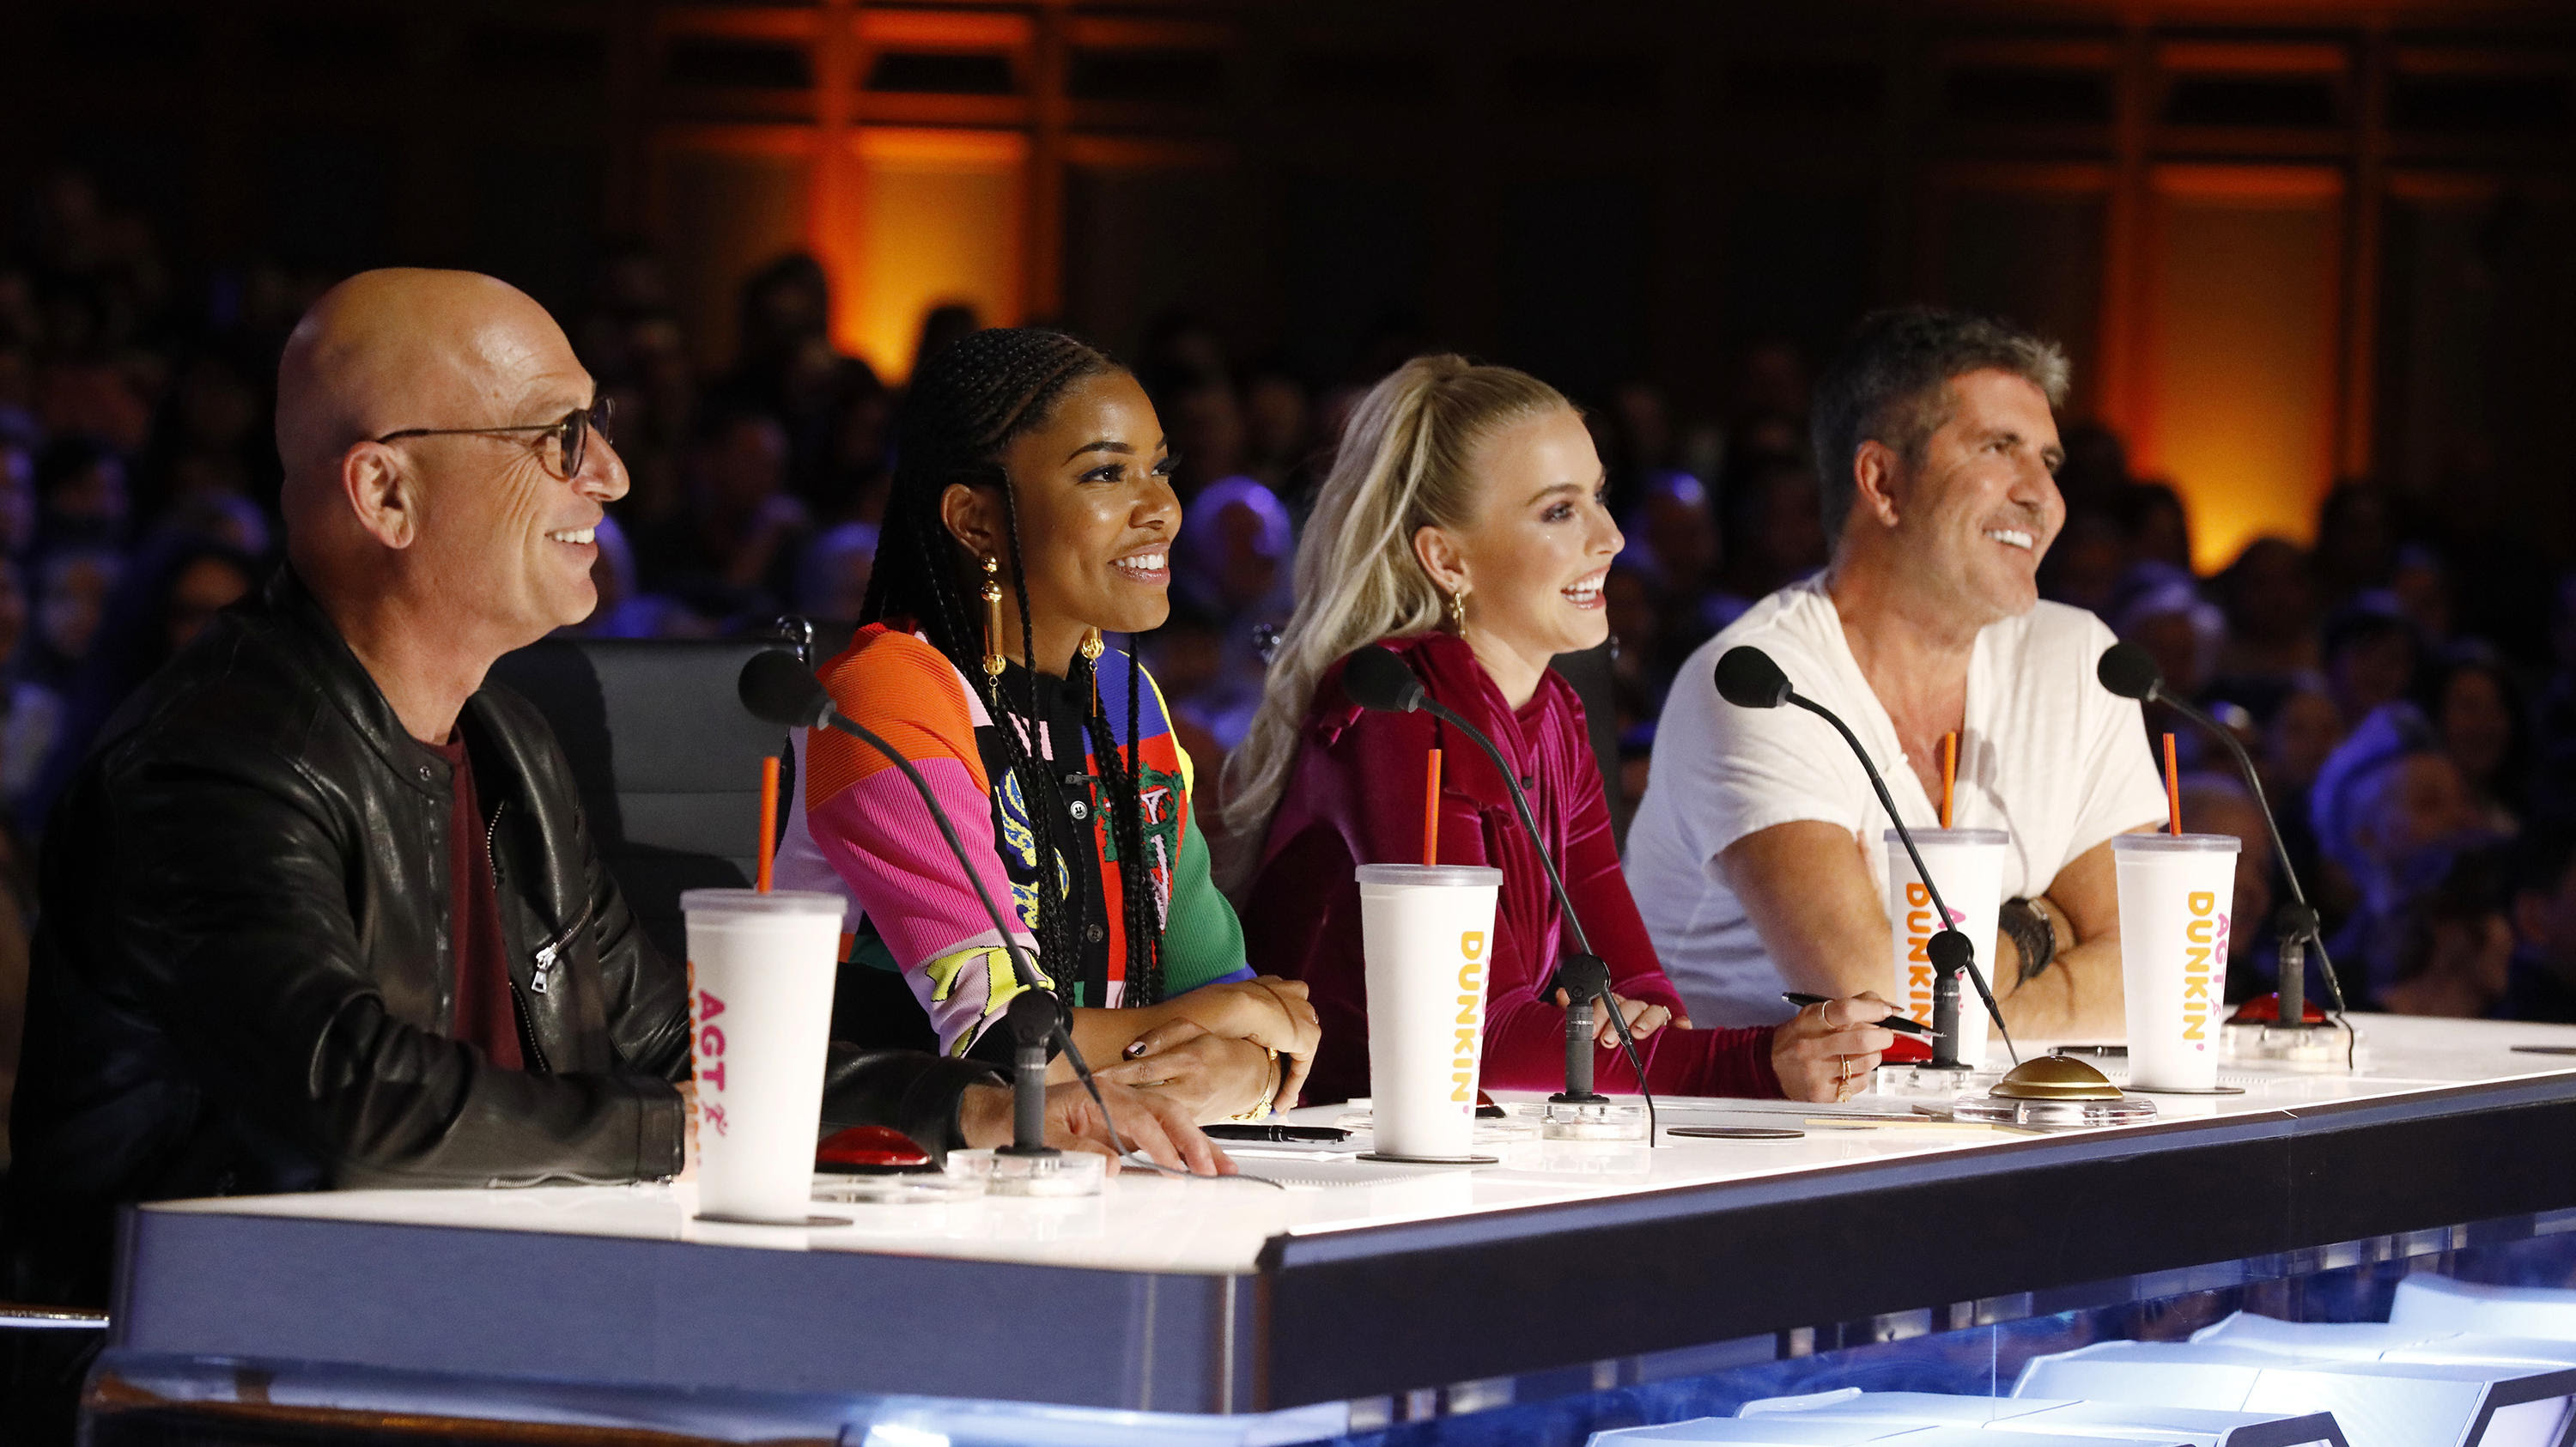 Report: Toxic culture led to 'AGT' stars' departures